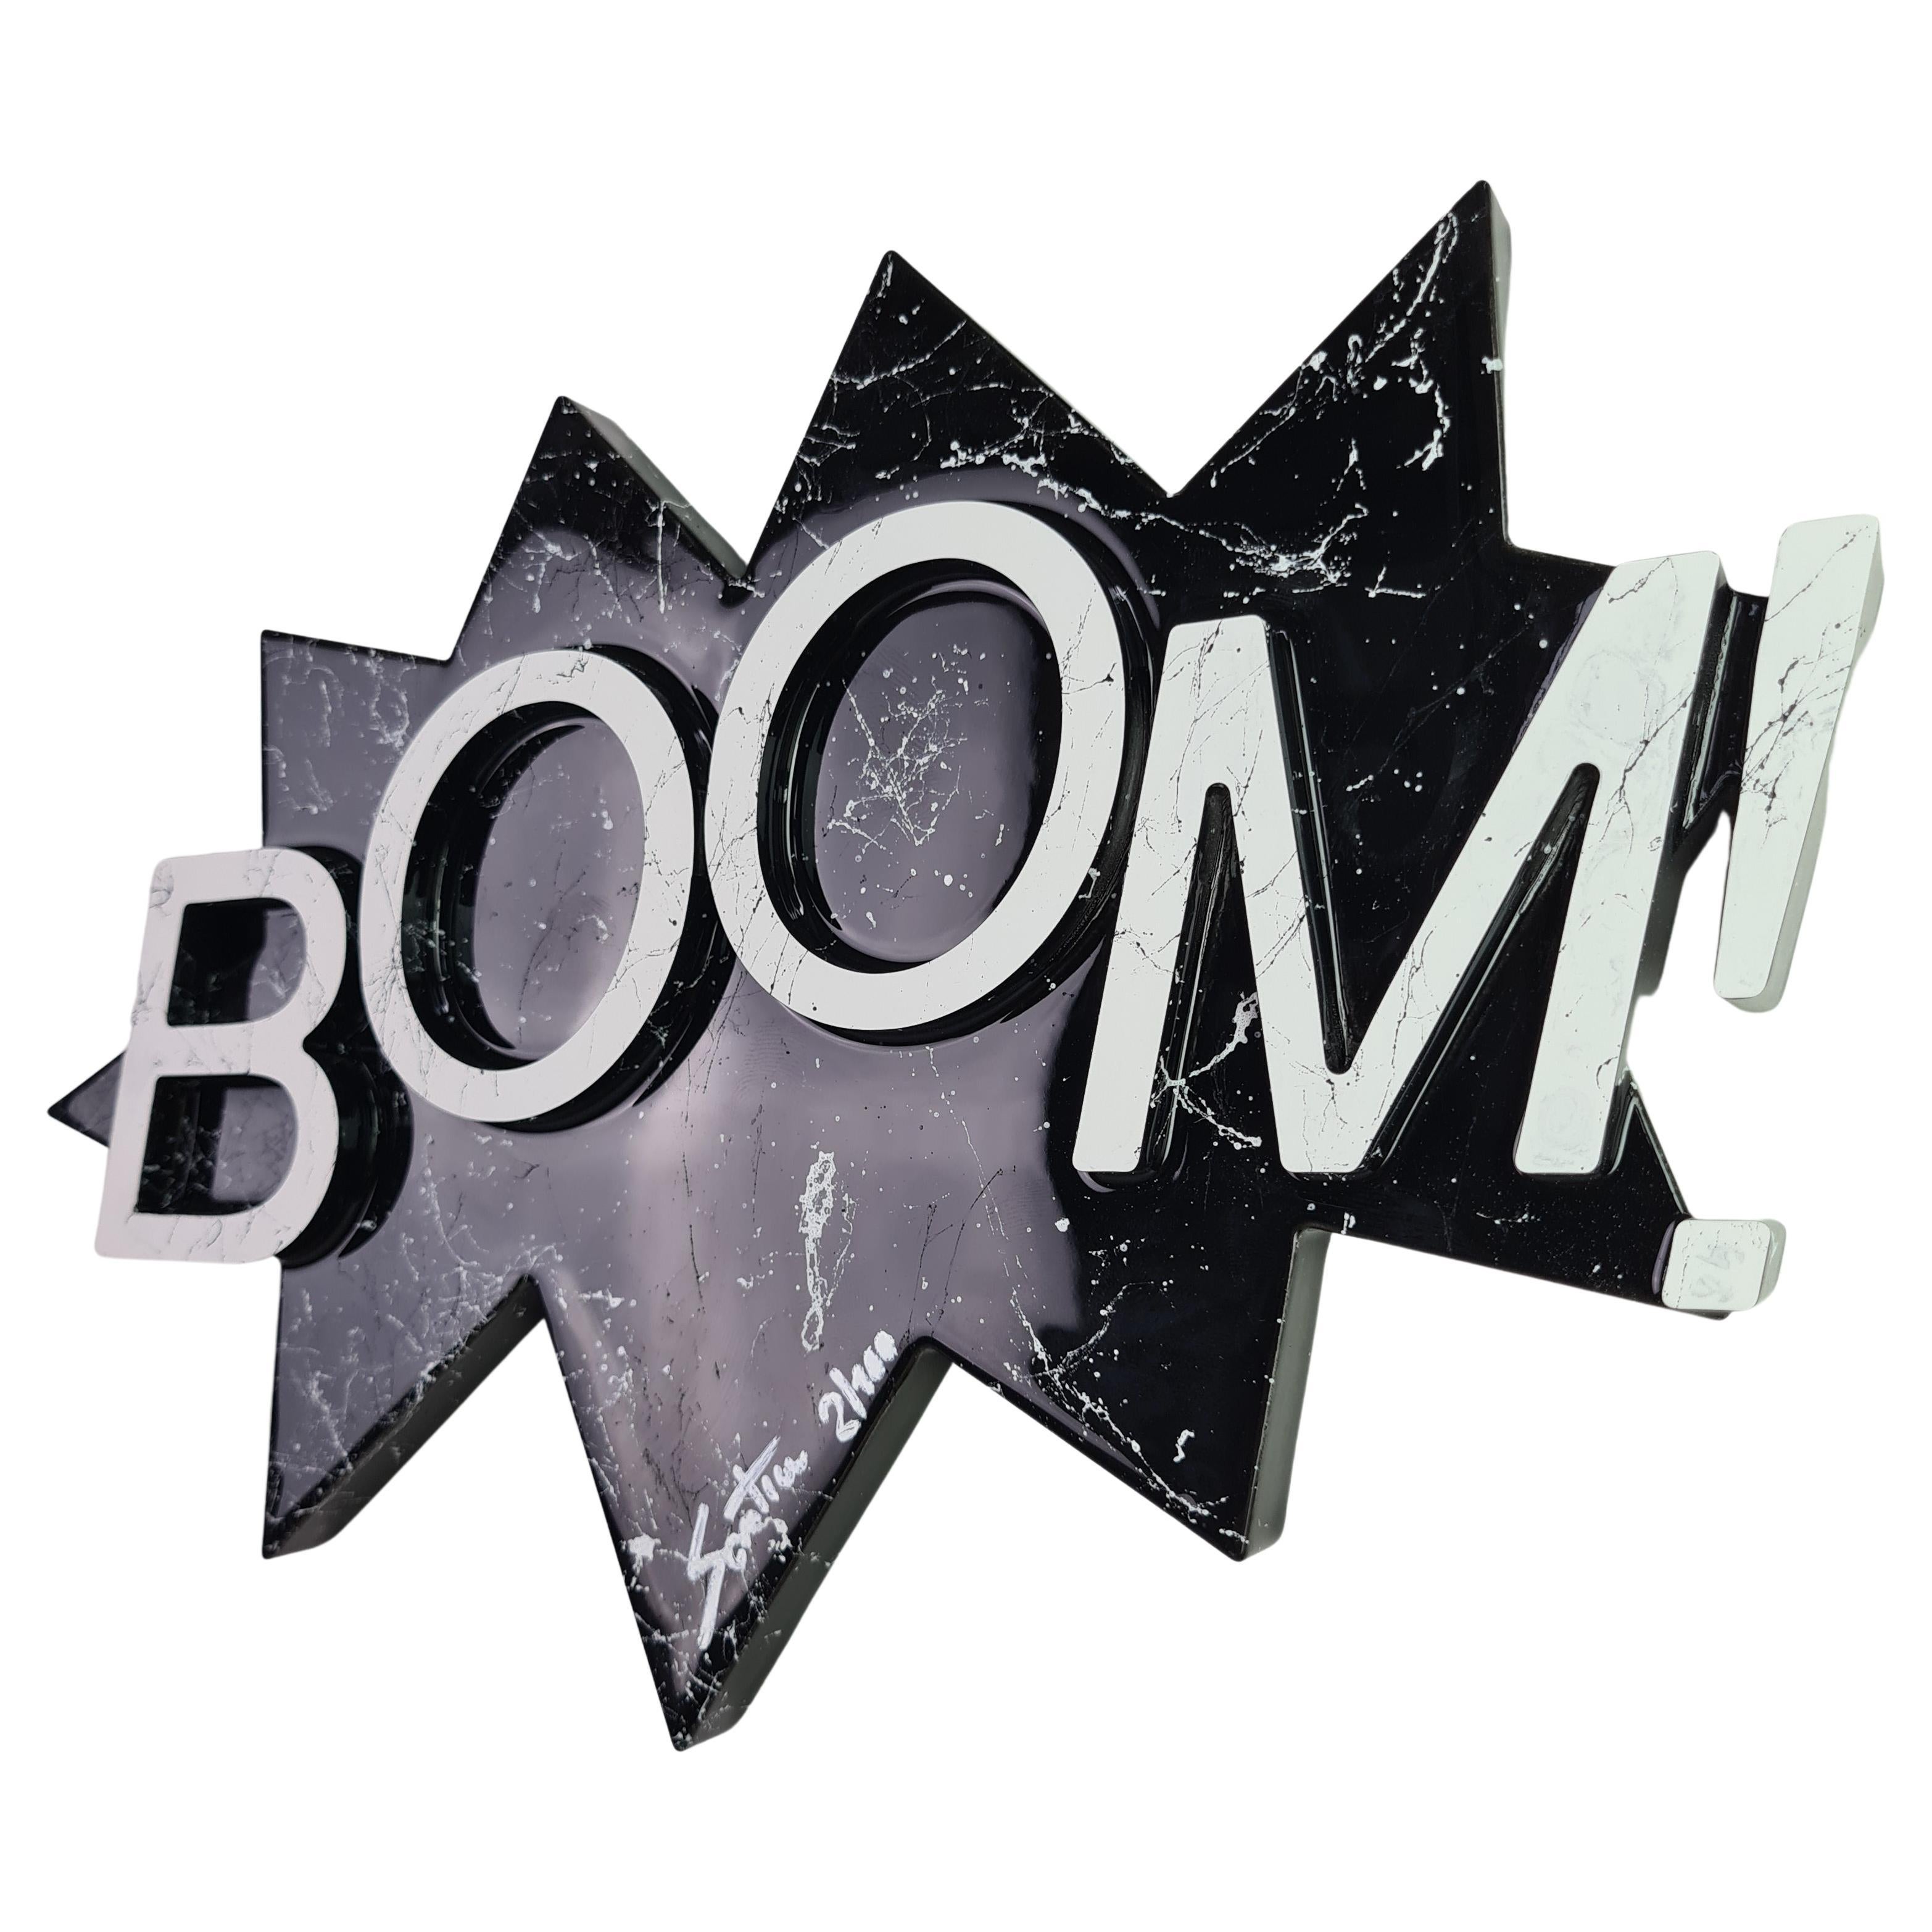 Contemporary Decor "Boom", Black & White Marble, Numbered, Handmade in Italy